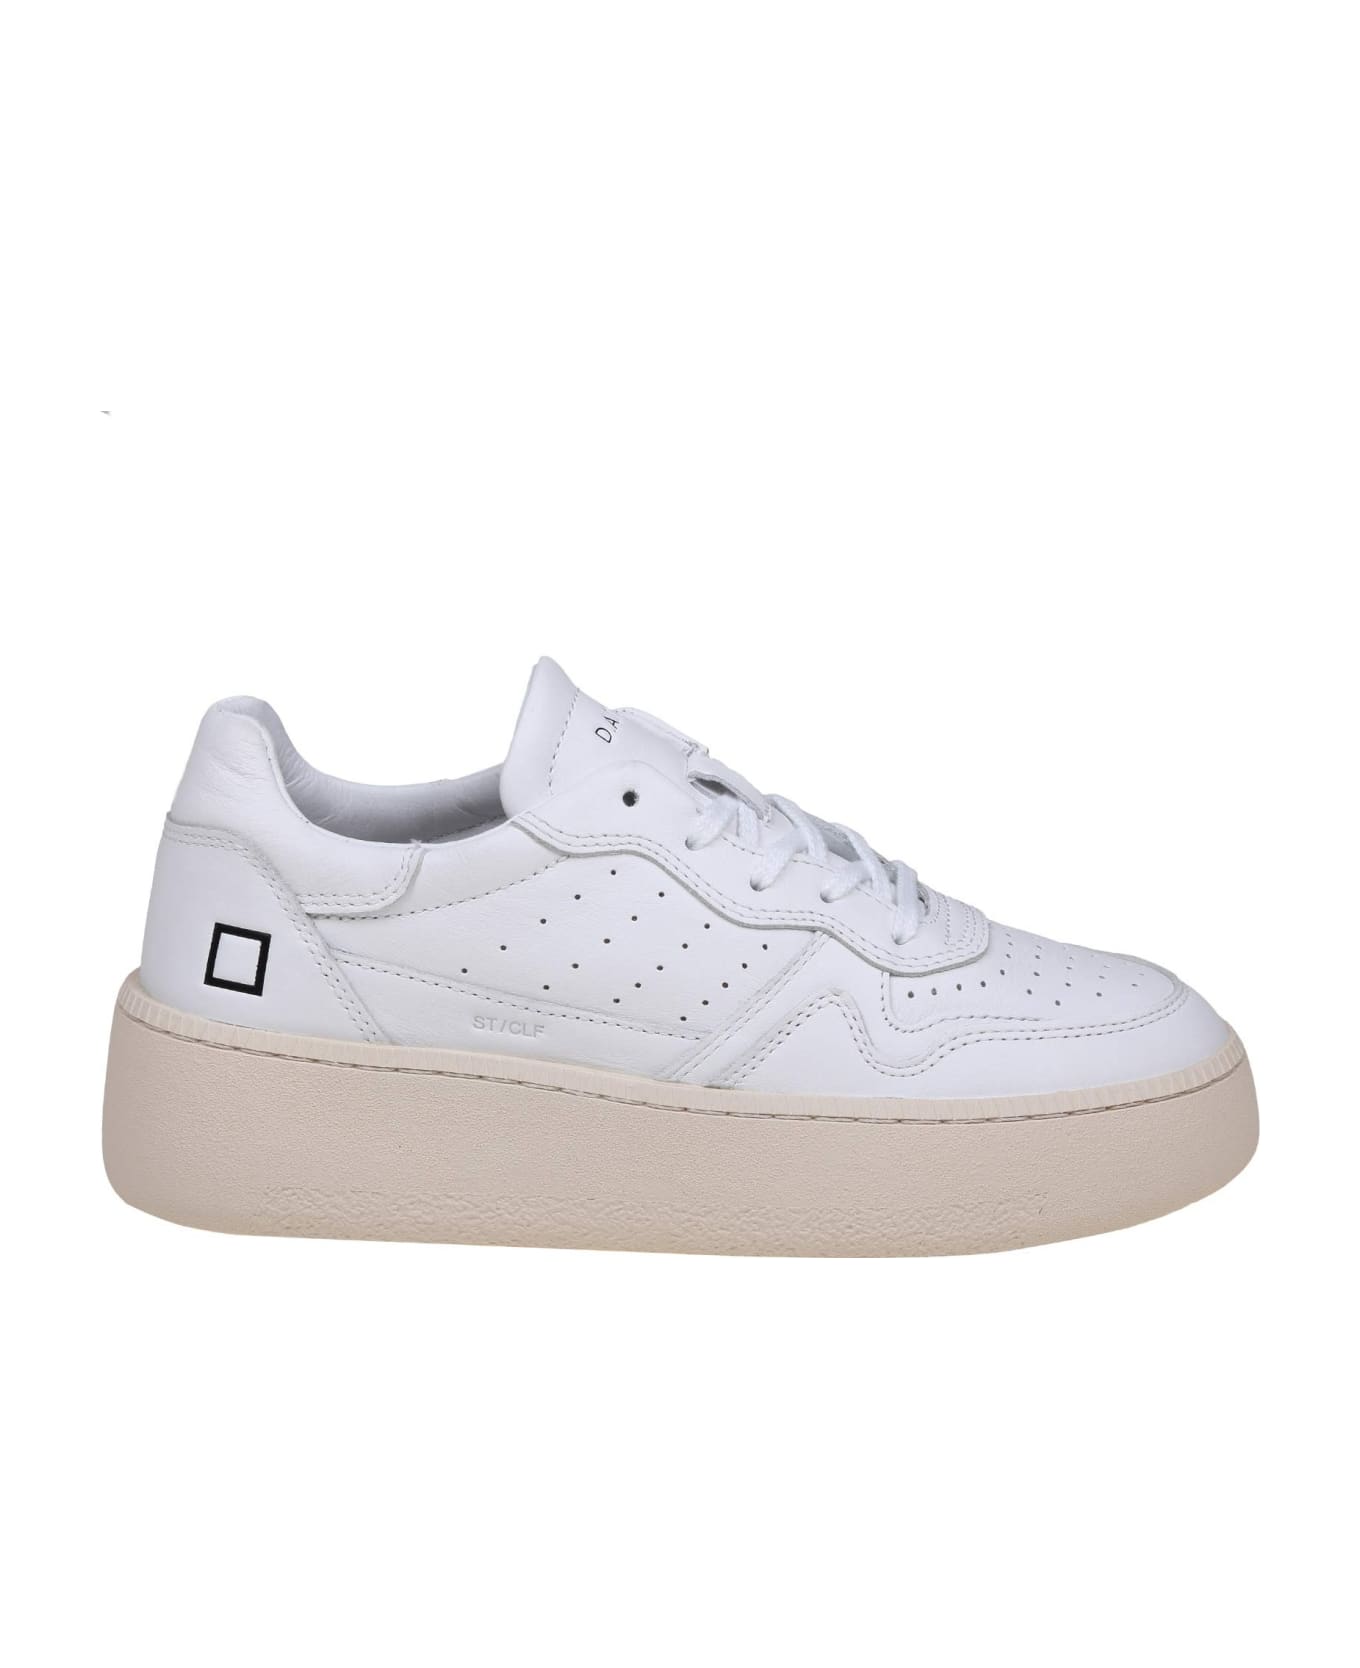 D.A.T.E. Step Calf Sneakers In Leather And White Color - White